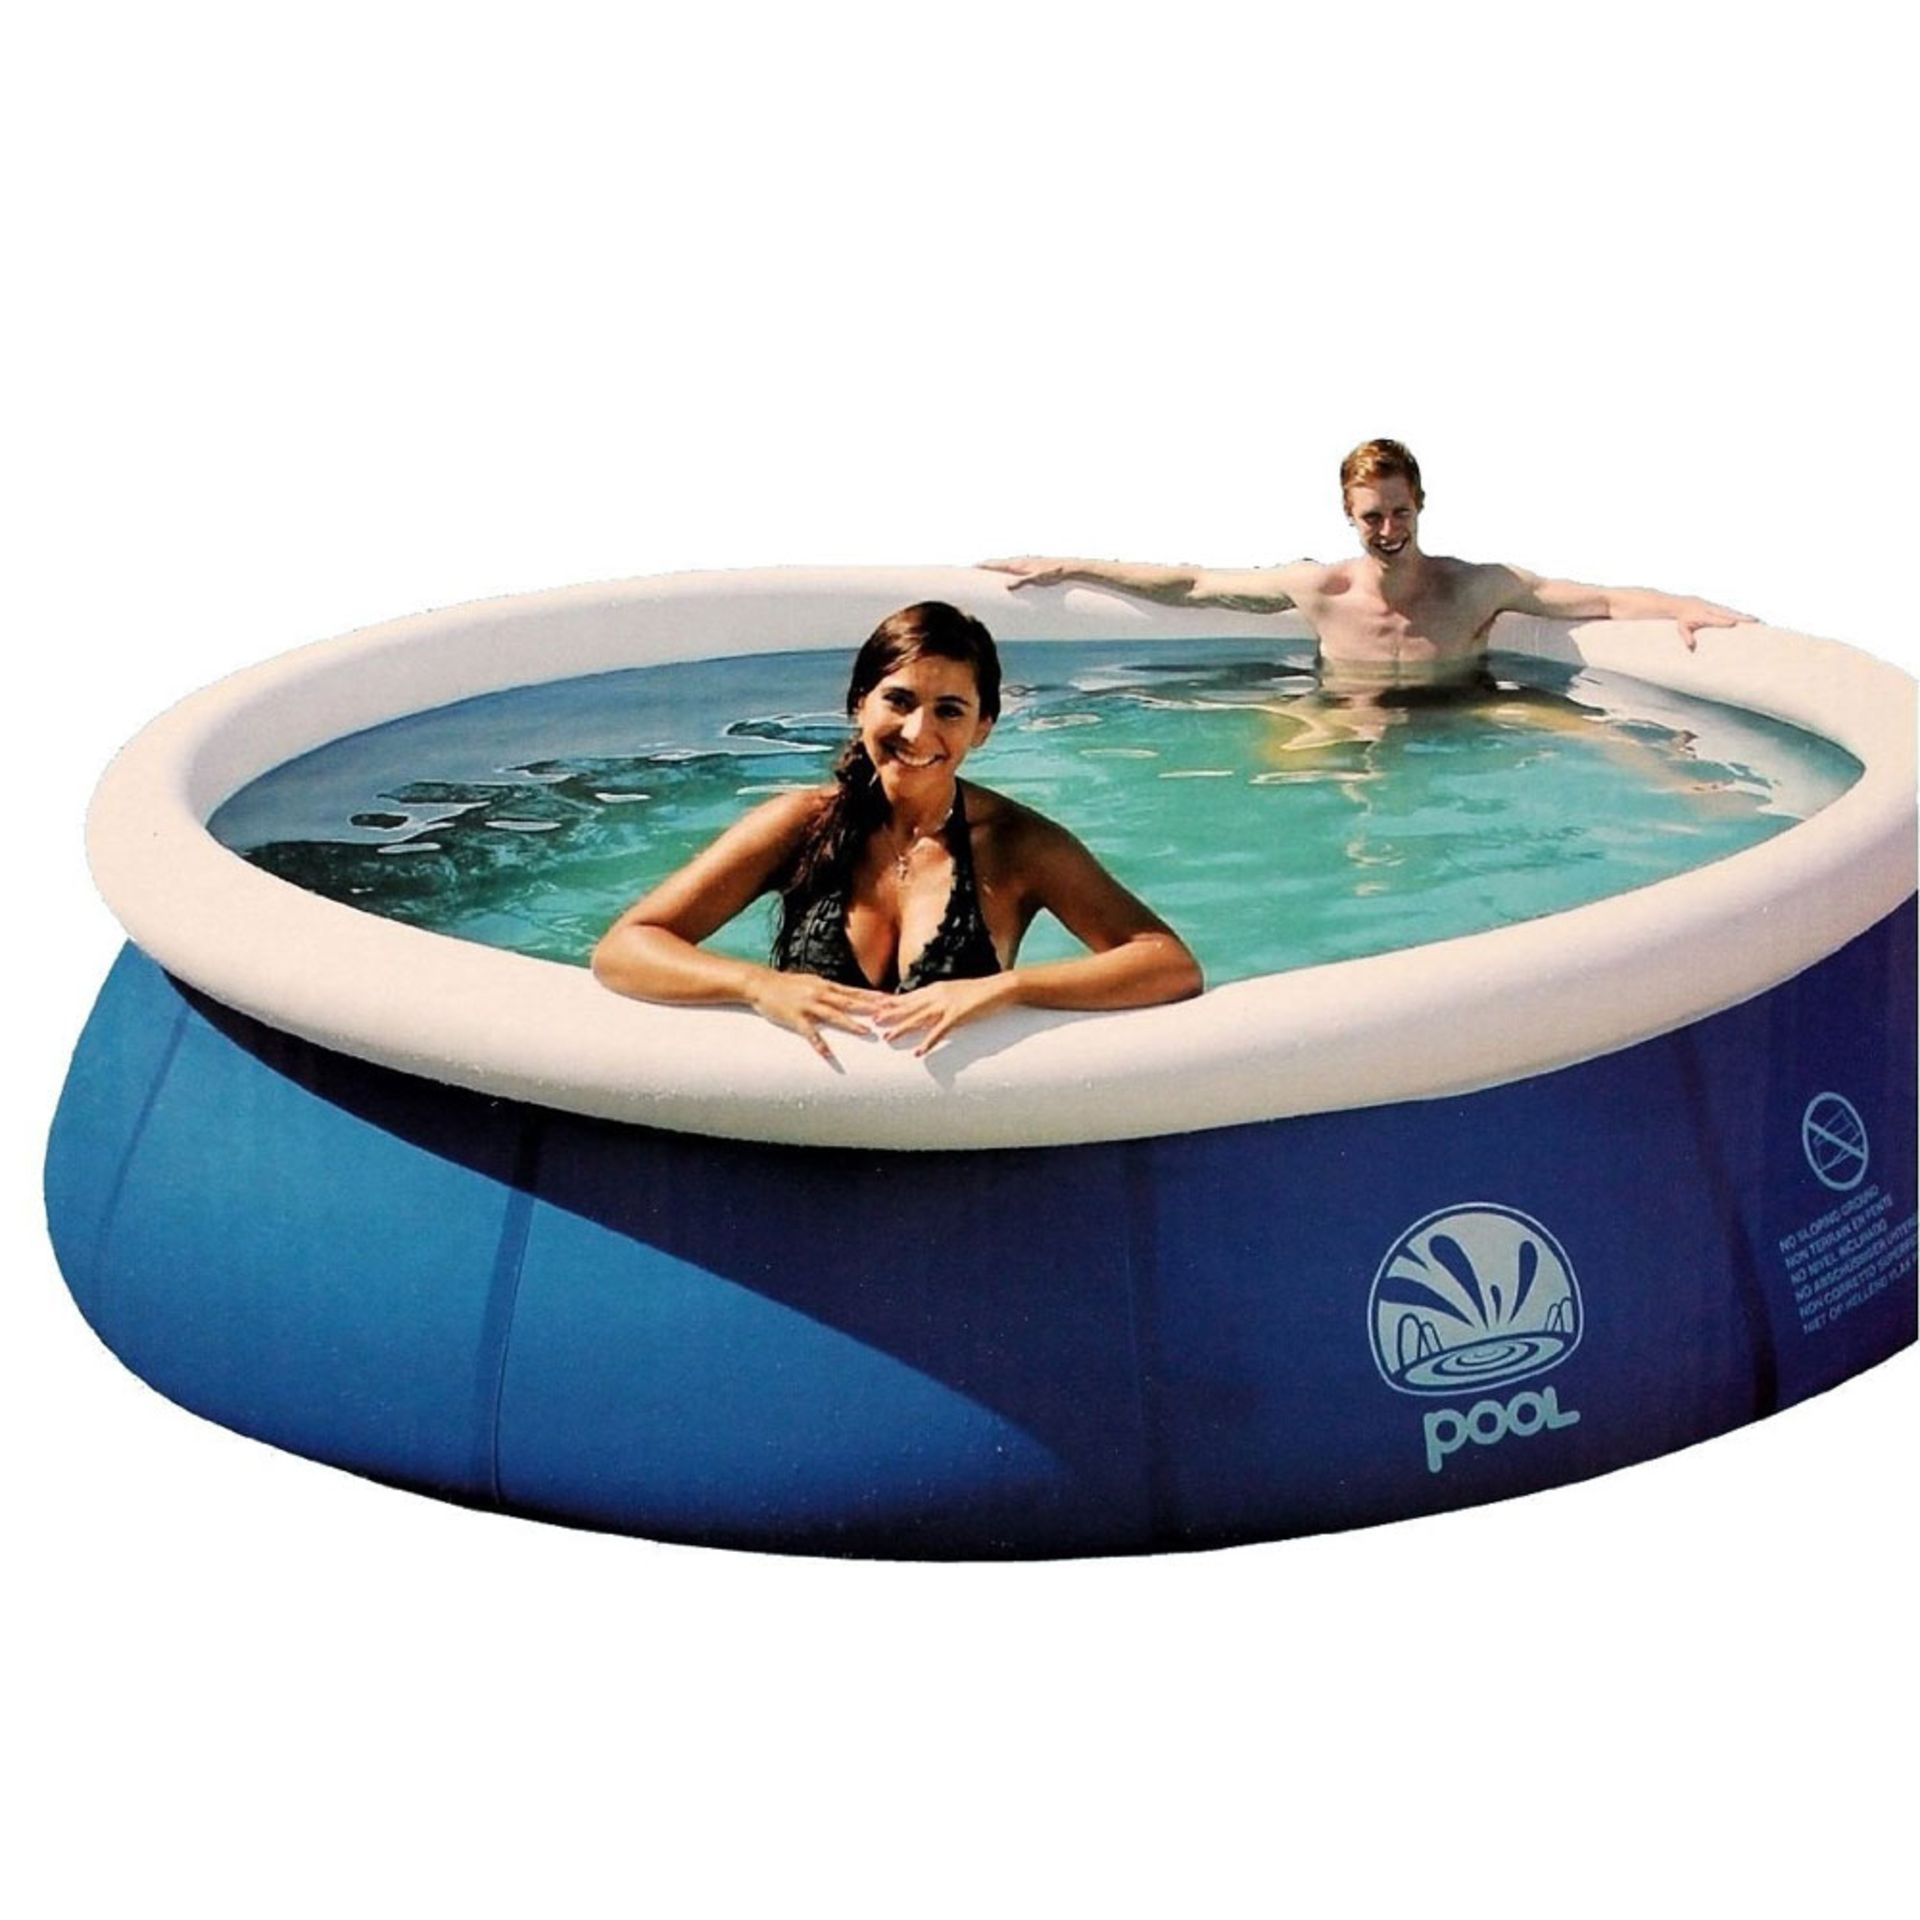 V Brand New 2.4m Quick-up Paddling Pool - Includes Repair Patch - Easy Up Construction - Fast - Image 2 of 2